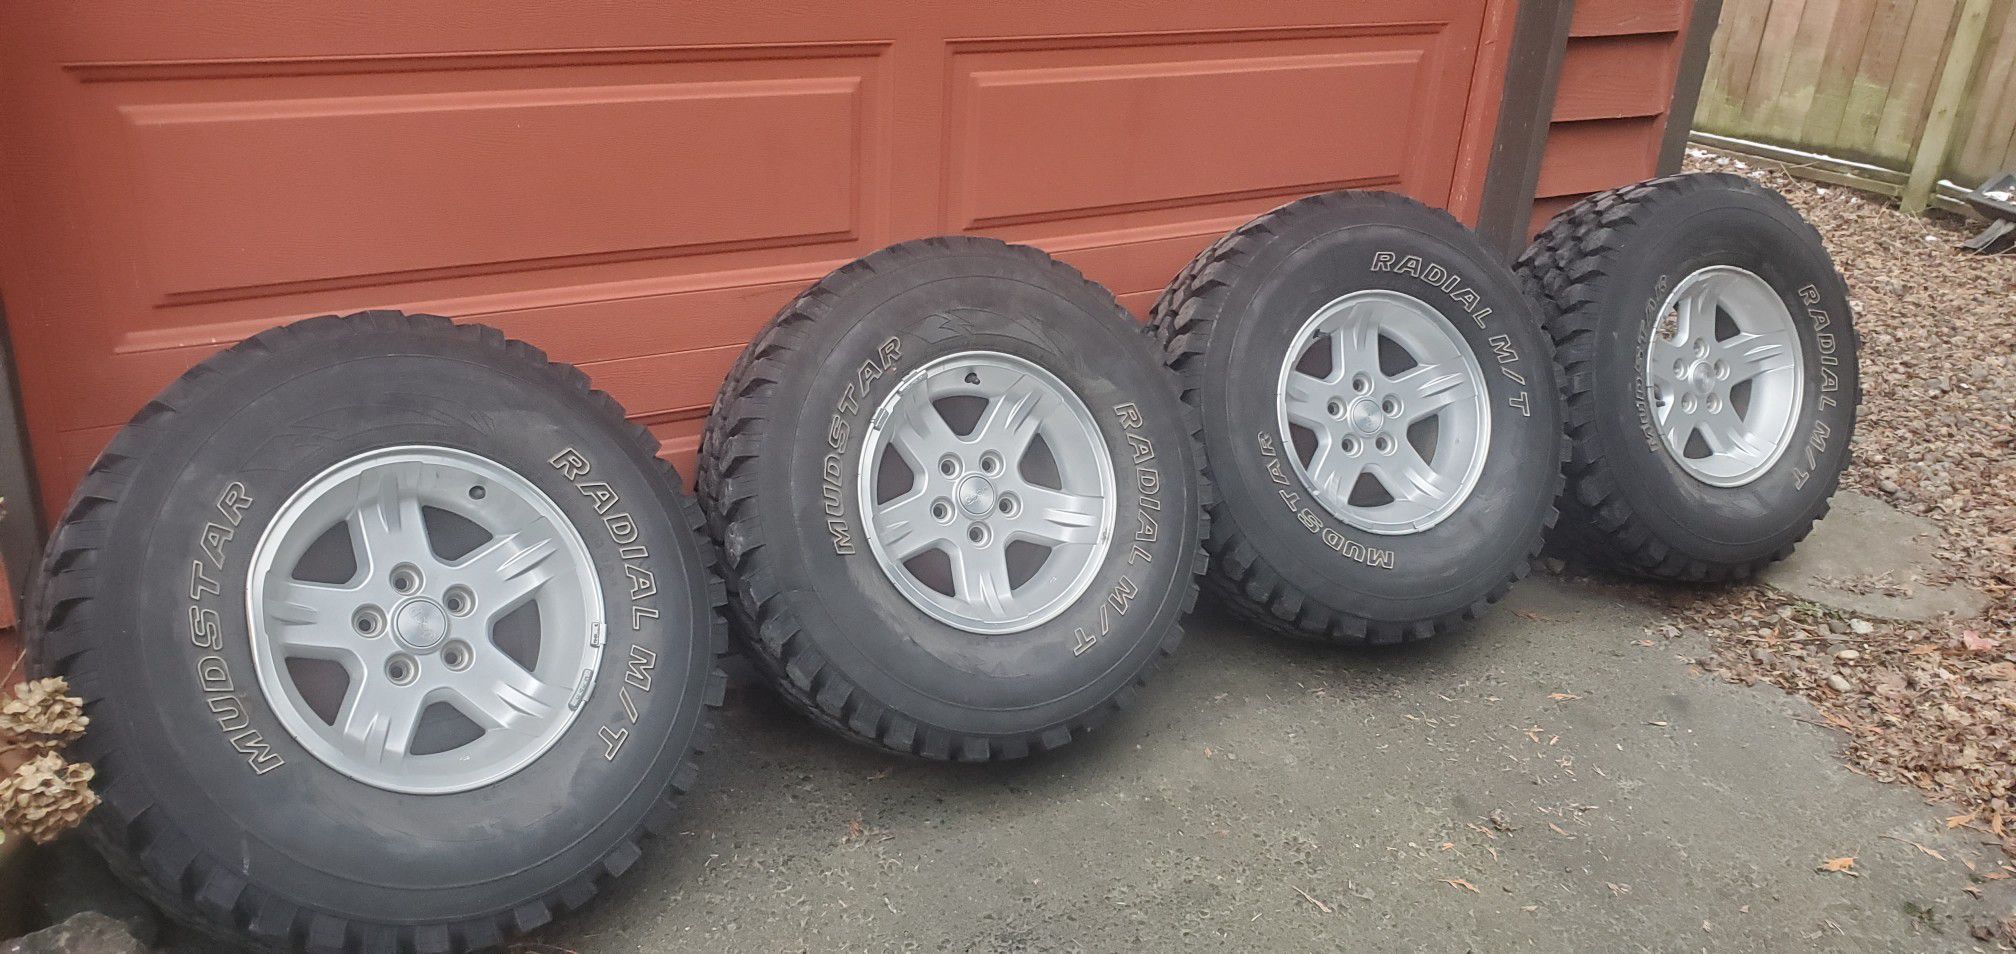 Jeep wheels with 32's